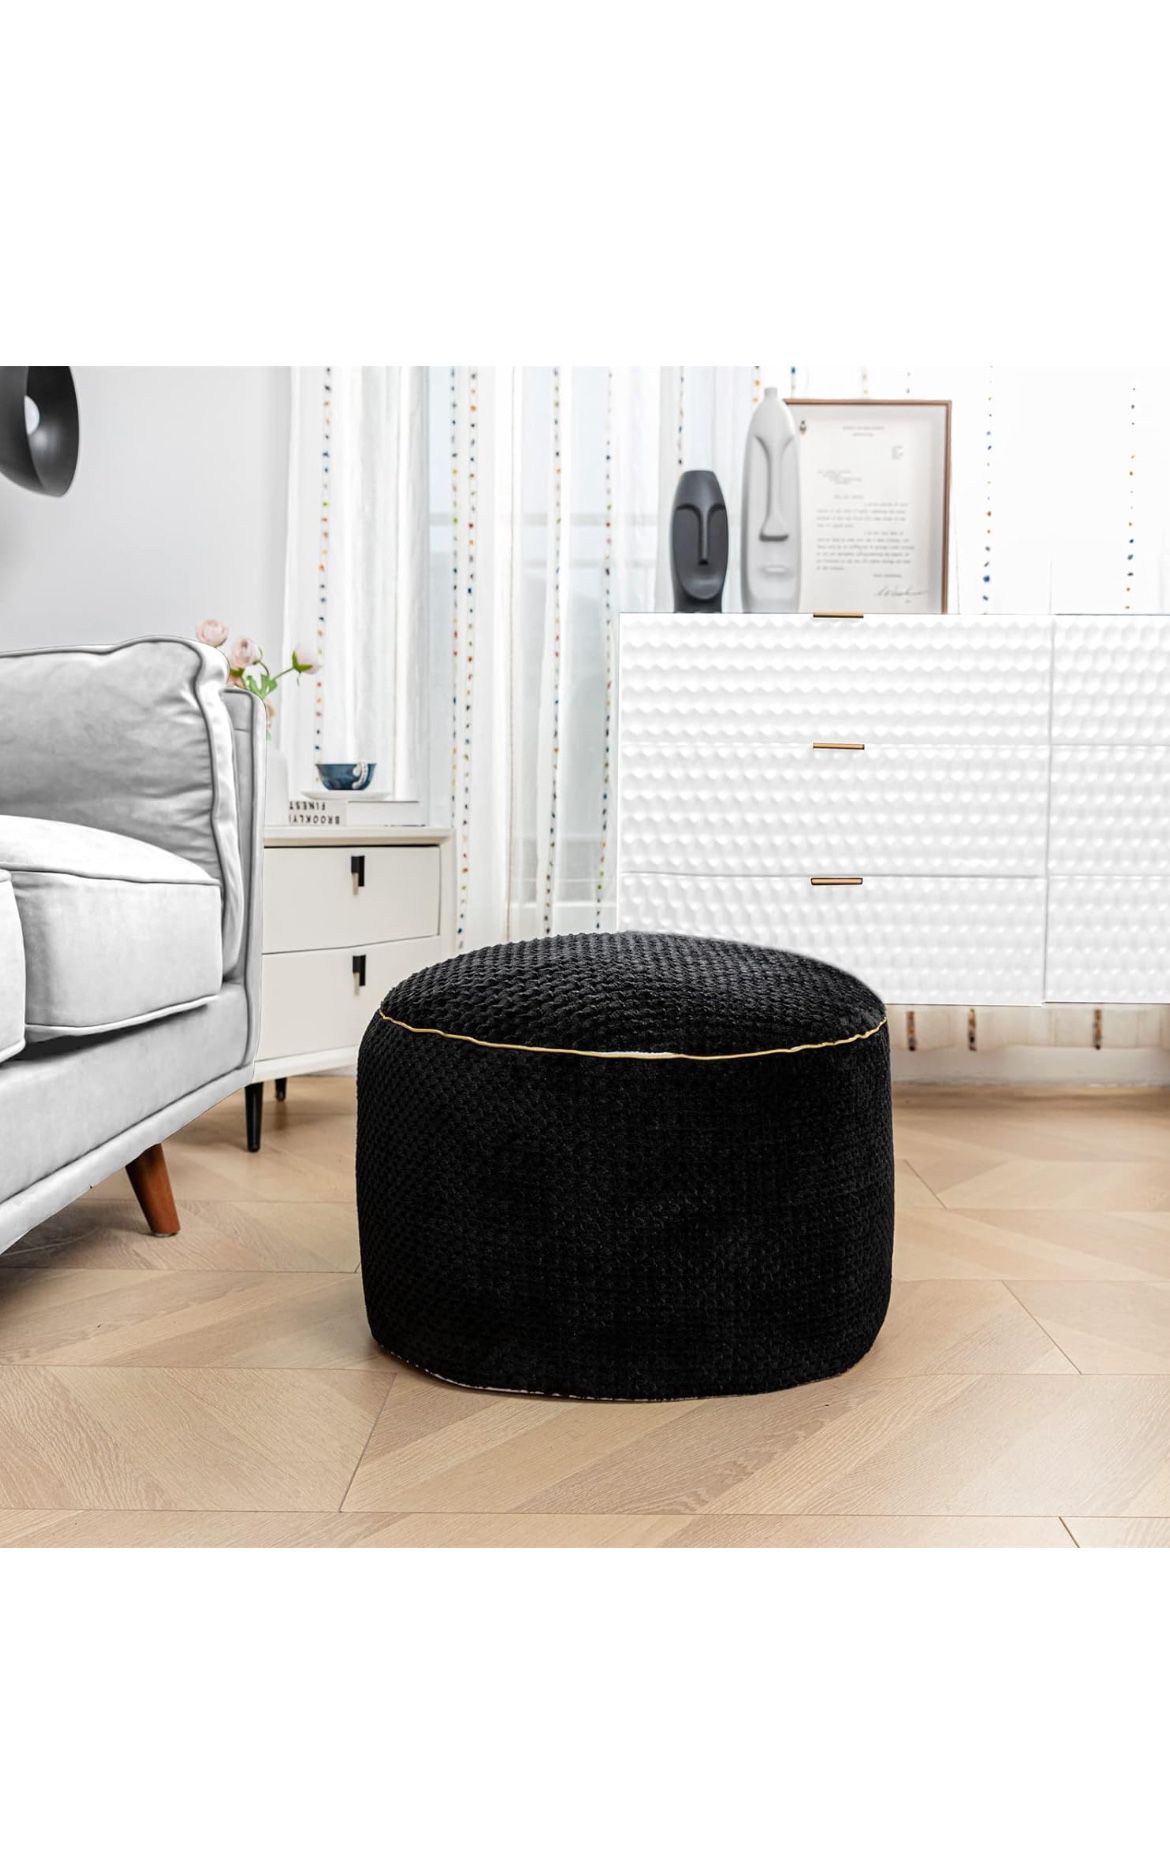 Round Stuffed Pouf Ottoman 20x20x12 Inches Faux Fur Ottoman Foot Rest Under Desk Foot Stool Great for Living Room, Bedroom Small Furniture (Black)